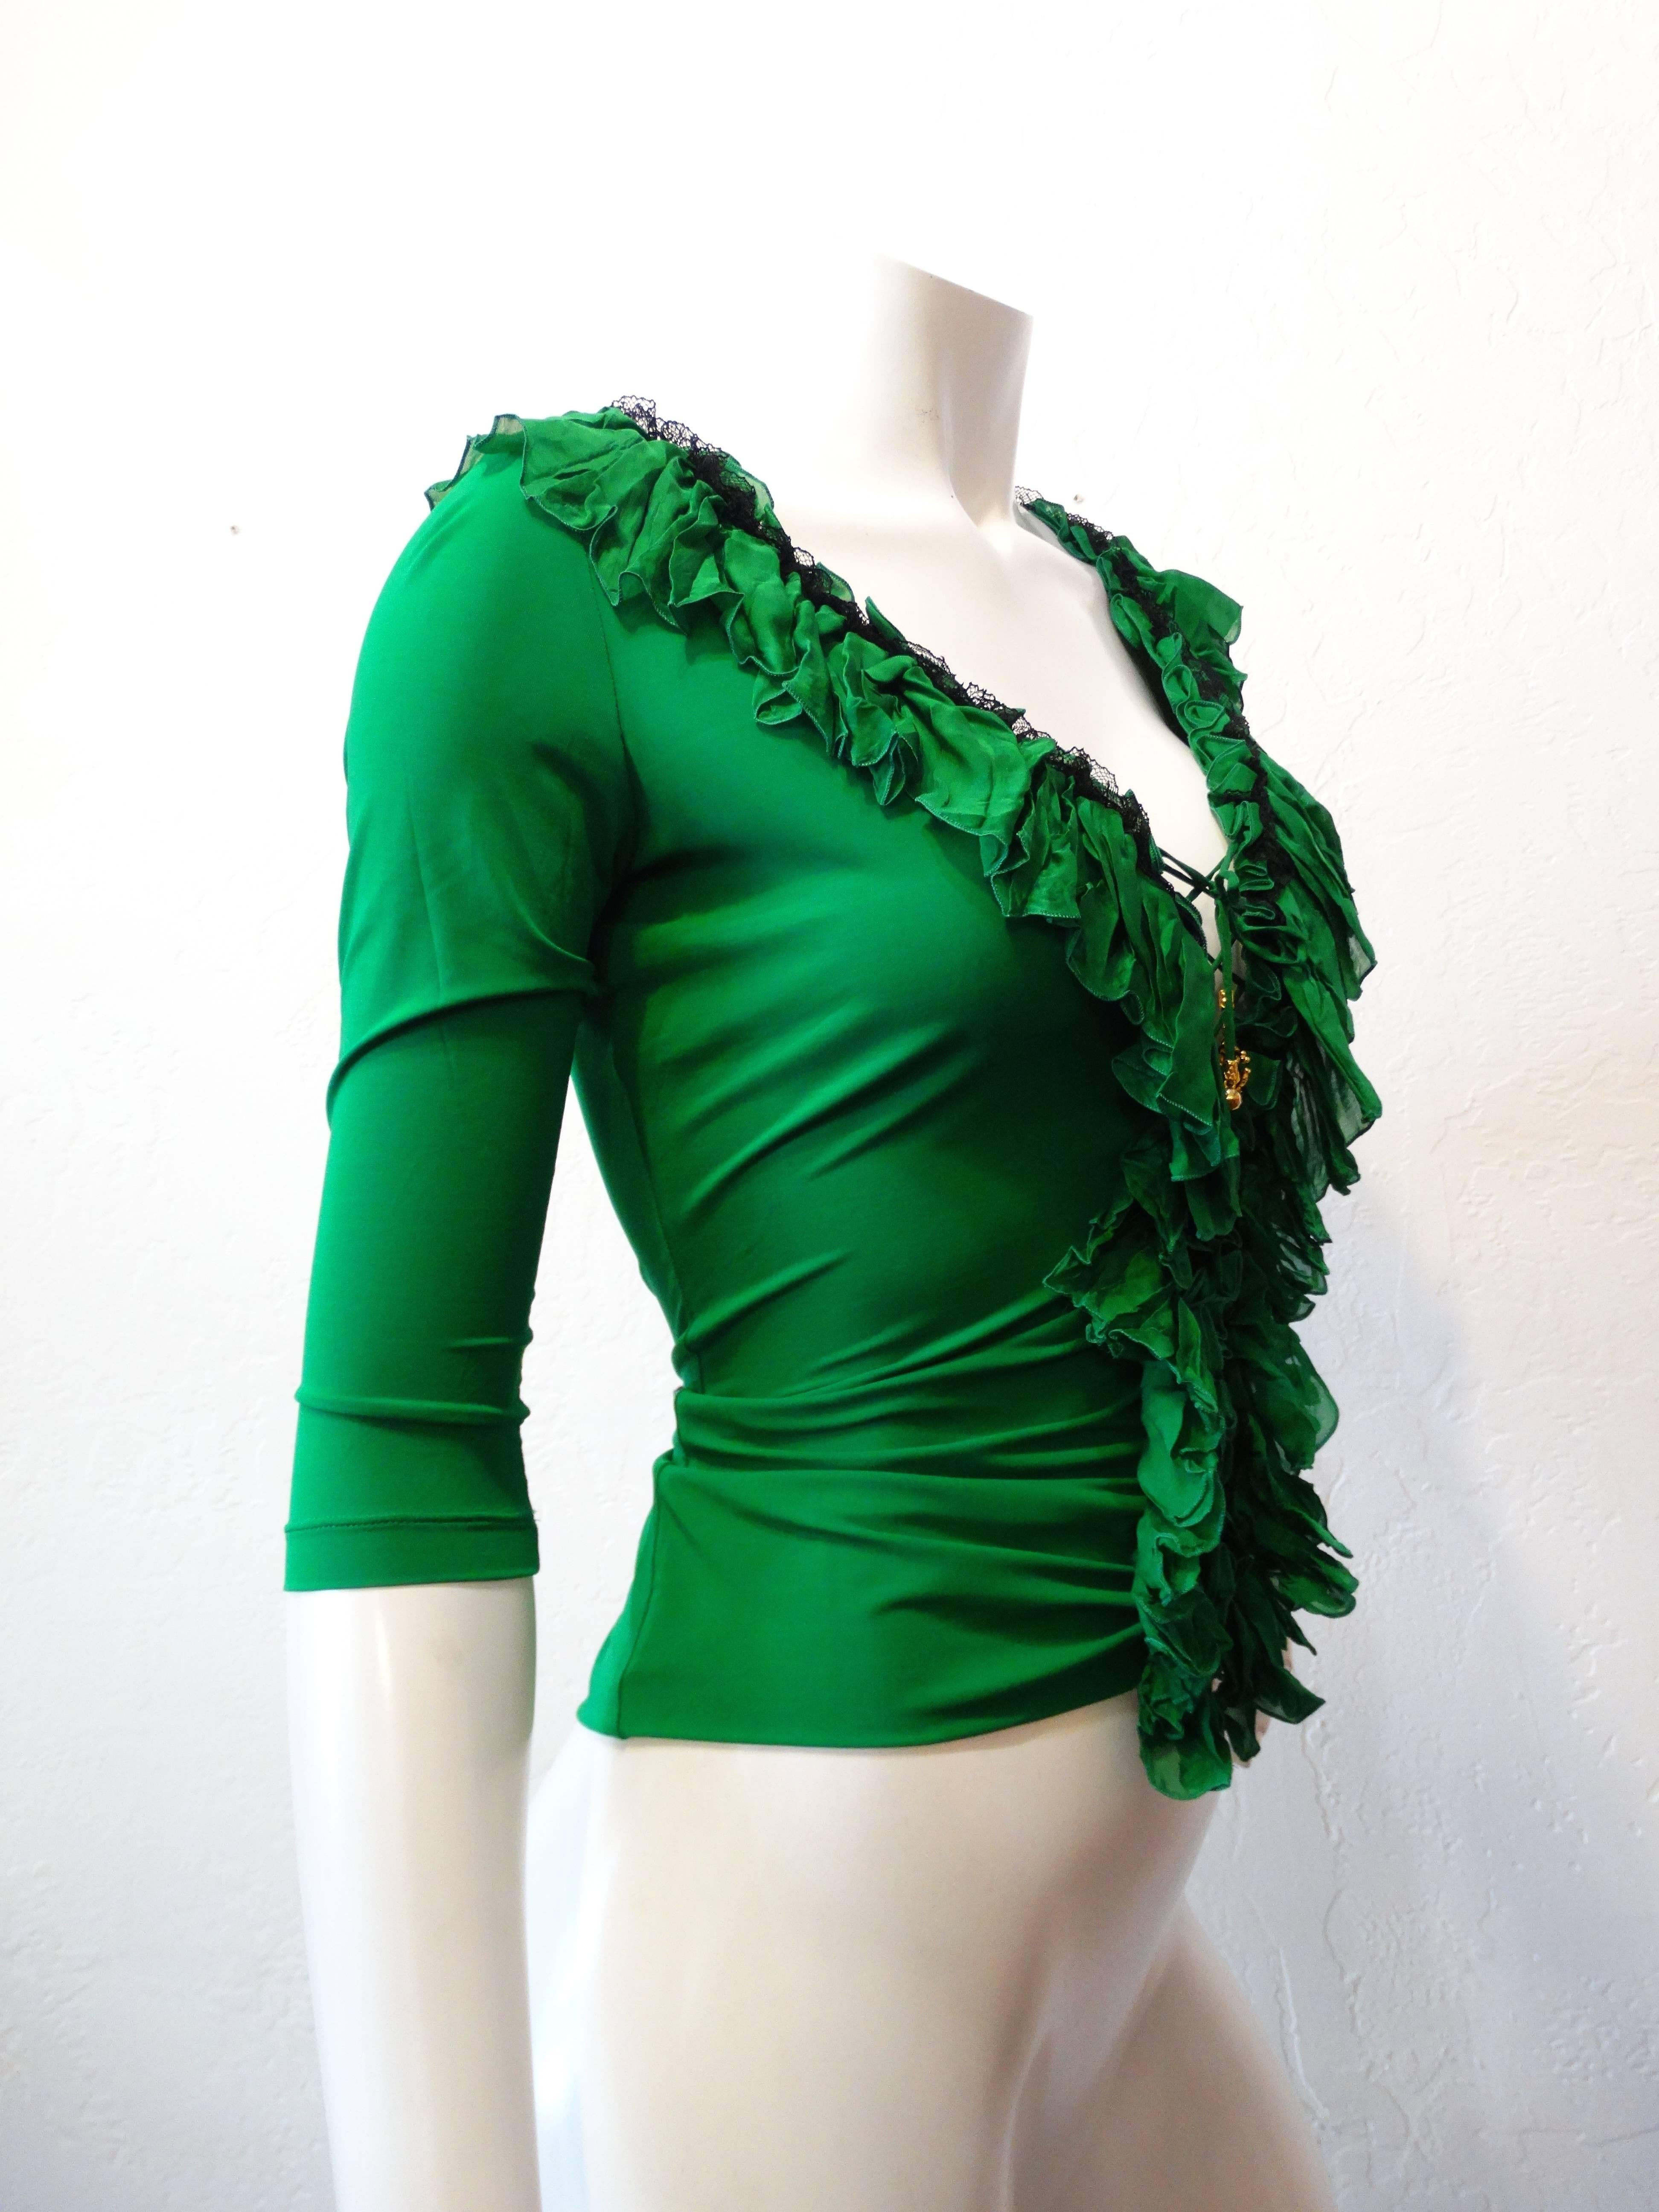 Roberto Cavalli Green Ruffle Corset Lace Up Top  In Excellent Condition For Sale In Scottsdale, AZ